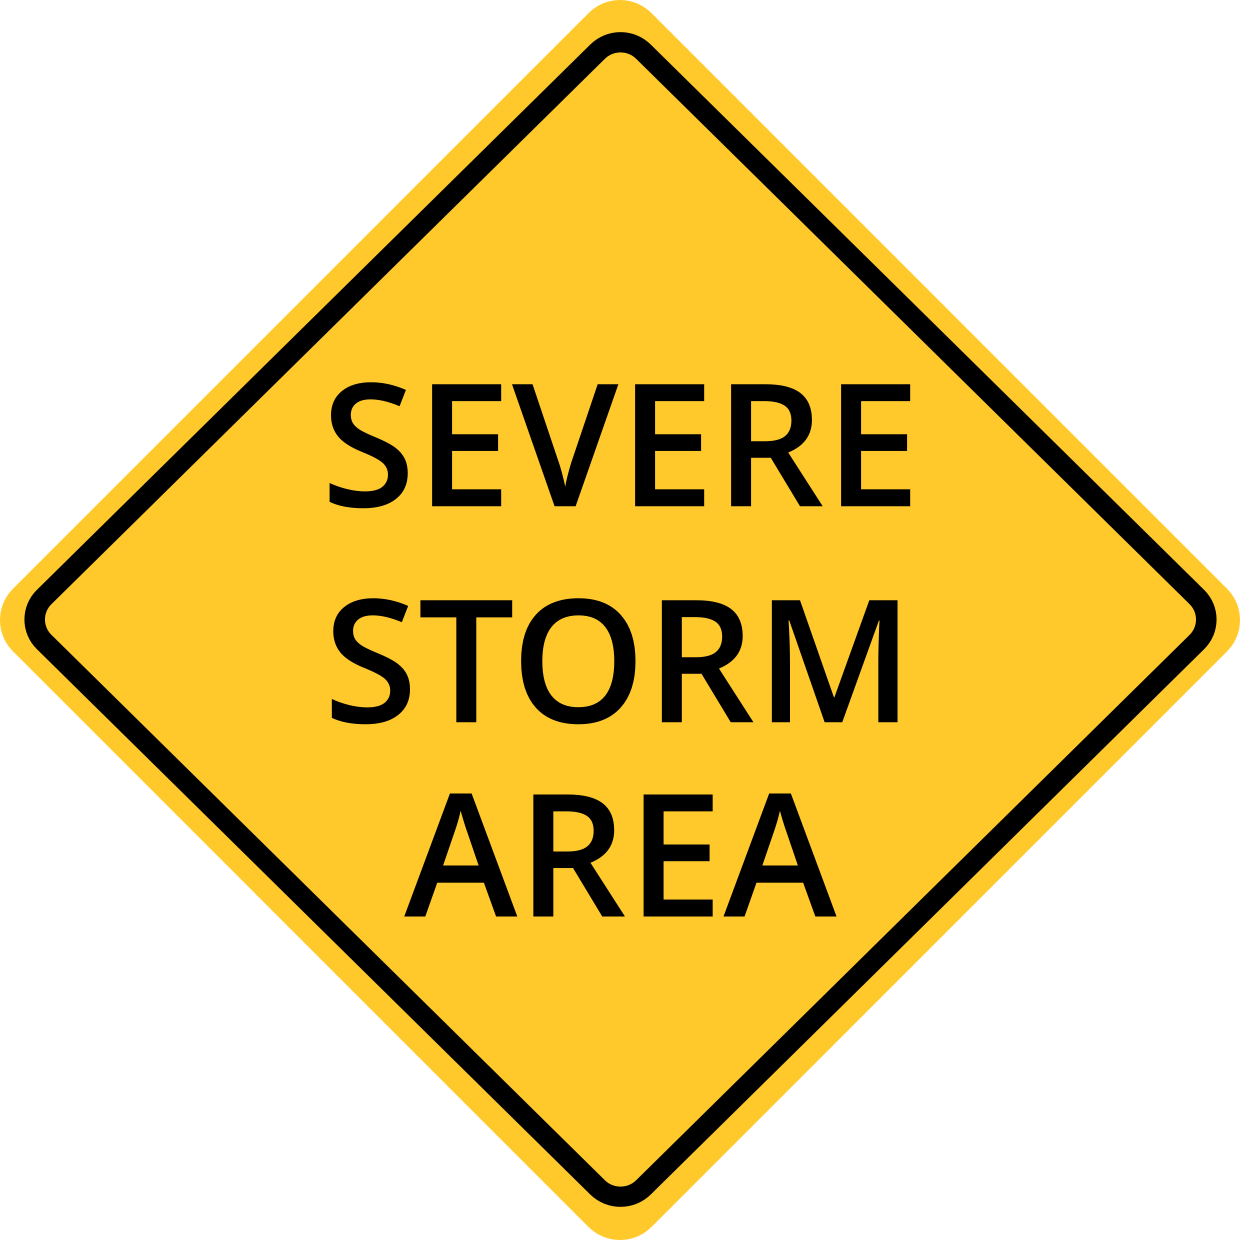 Severe Storm Area Text On Yellow Warning Sign Template Square Signs 9909